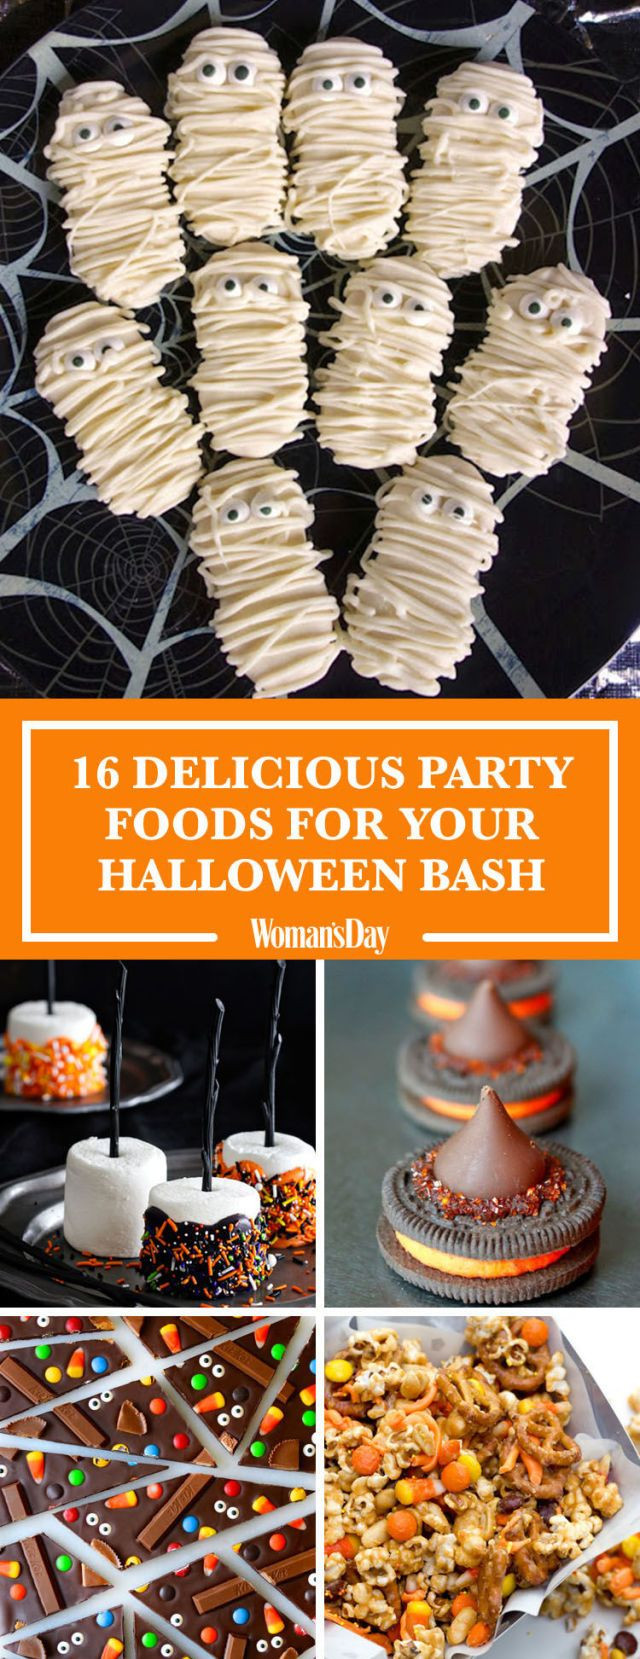 Cute Halloween Food Ideas For A Party
 22 Easy Halloween Party Food Ideas Cute Recipes for